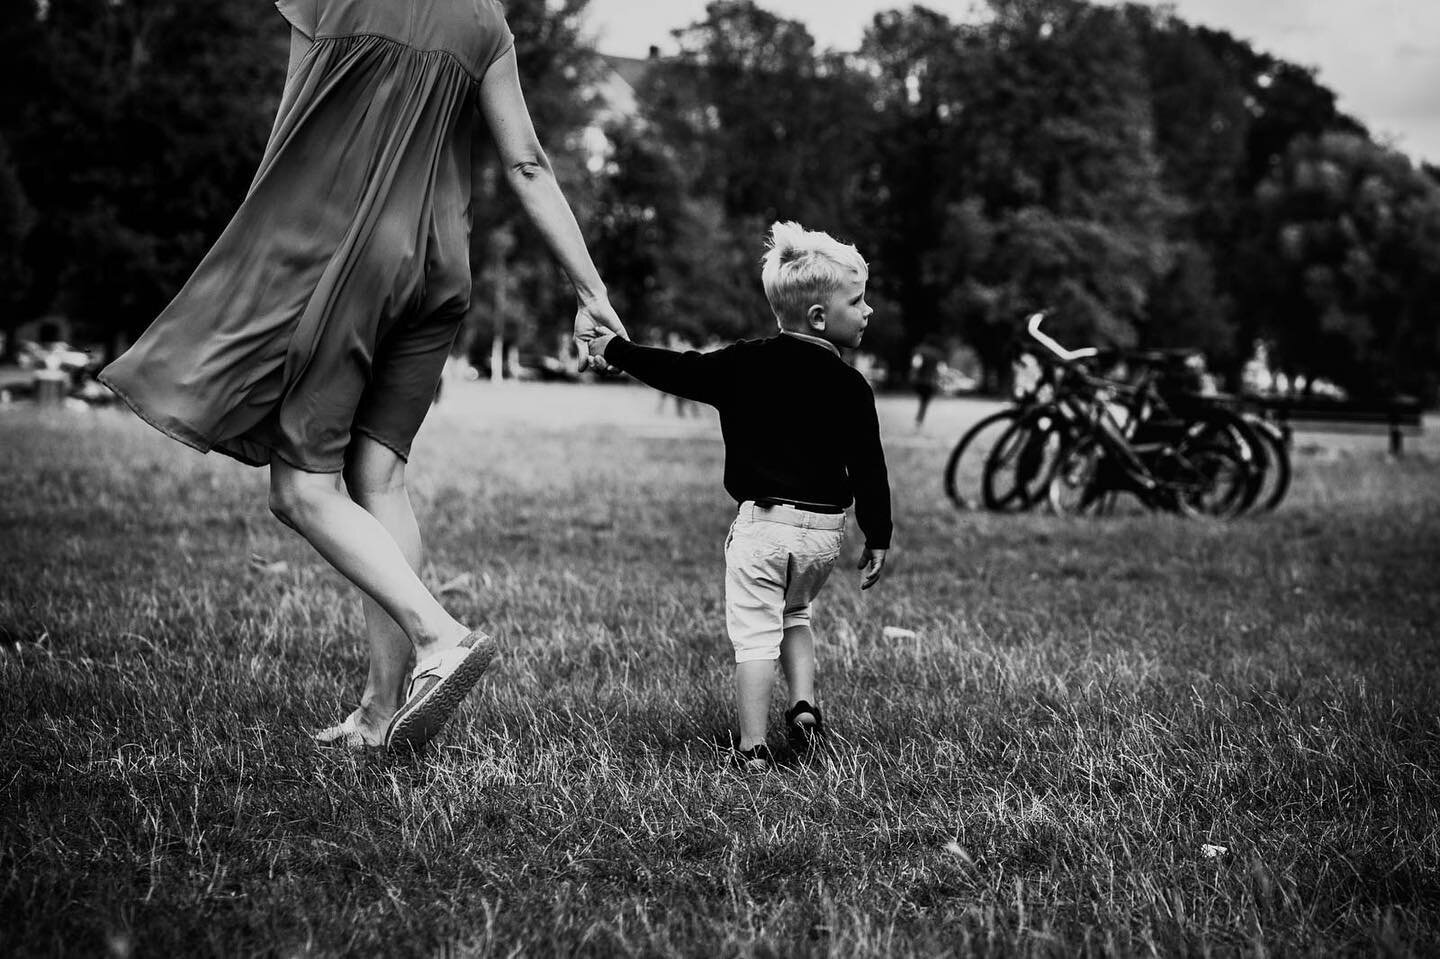 Being a mother myself I know in my everyday life which moments I would like to have photographed with my son. As a documentary photographer I aim to give you the gift of having those moments turned into photographs that will last a lifetime...no pose